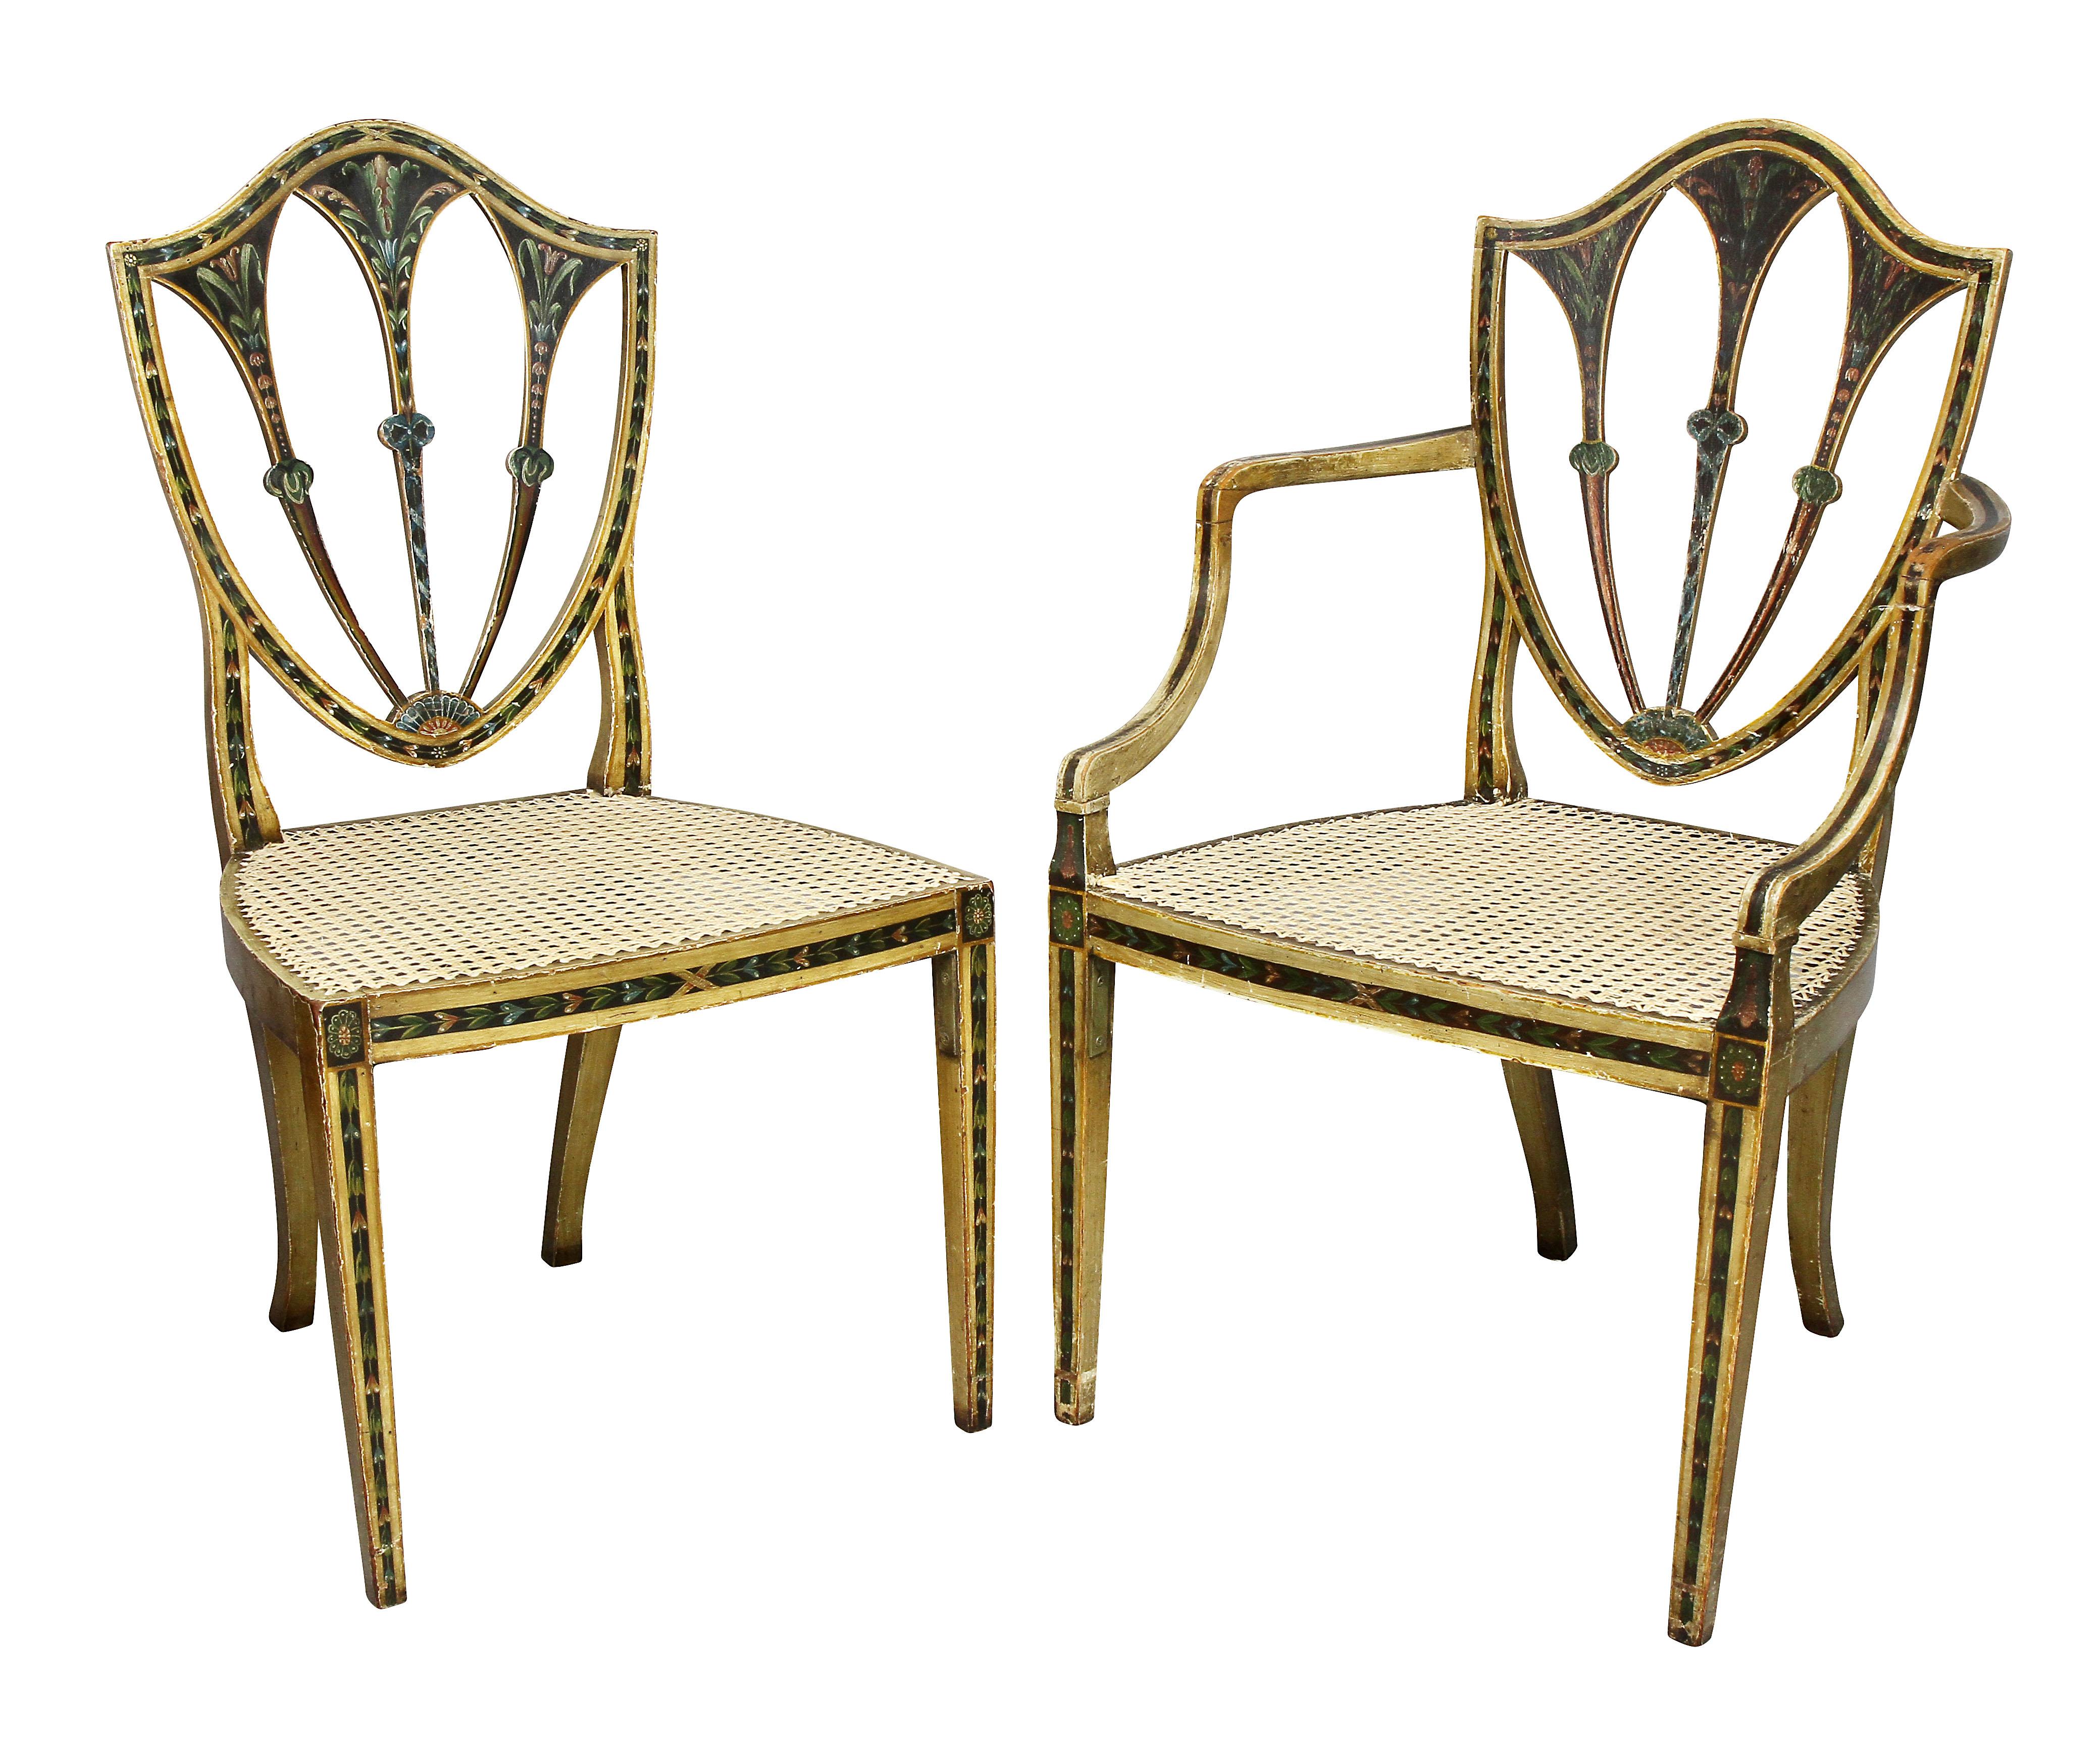 Comprising a pair of armchairs and 10 side chairs, each with a shield back and caned seats {all newly hand caned] raised on square tapered legs. Paint decoration in a variety of condition some worn more than others. They have a country more rustic